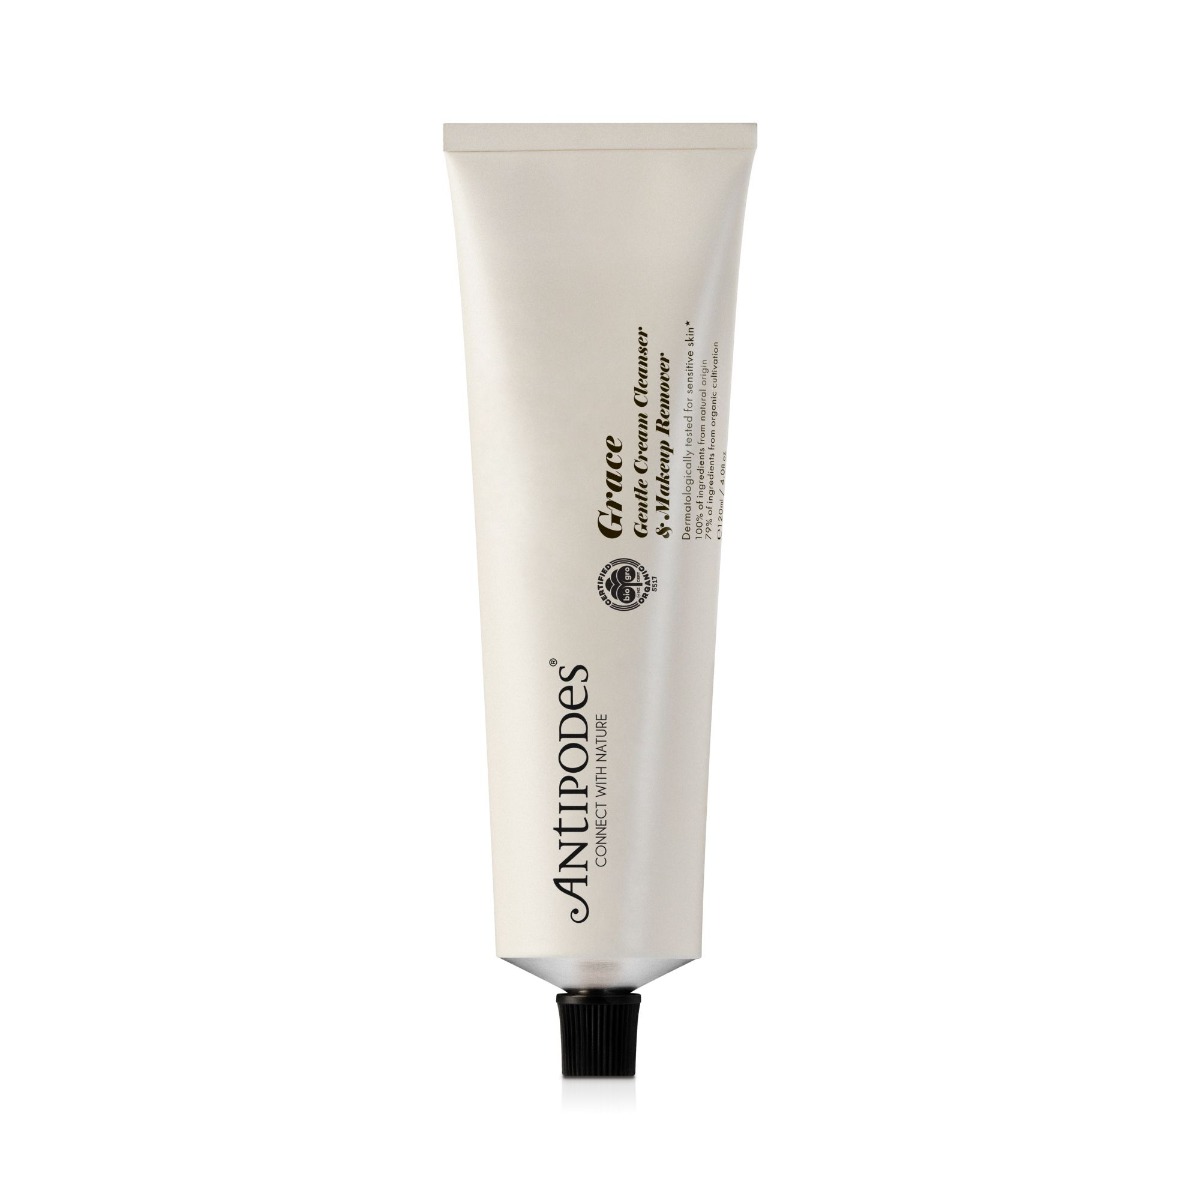 Antipodes Grace Gentle Cream Cleanser 120 ml Antipodes